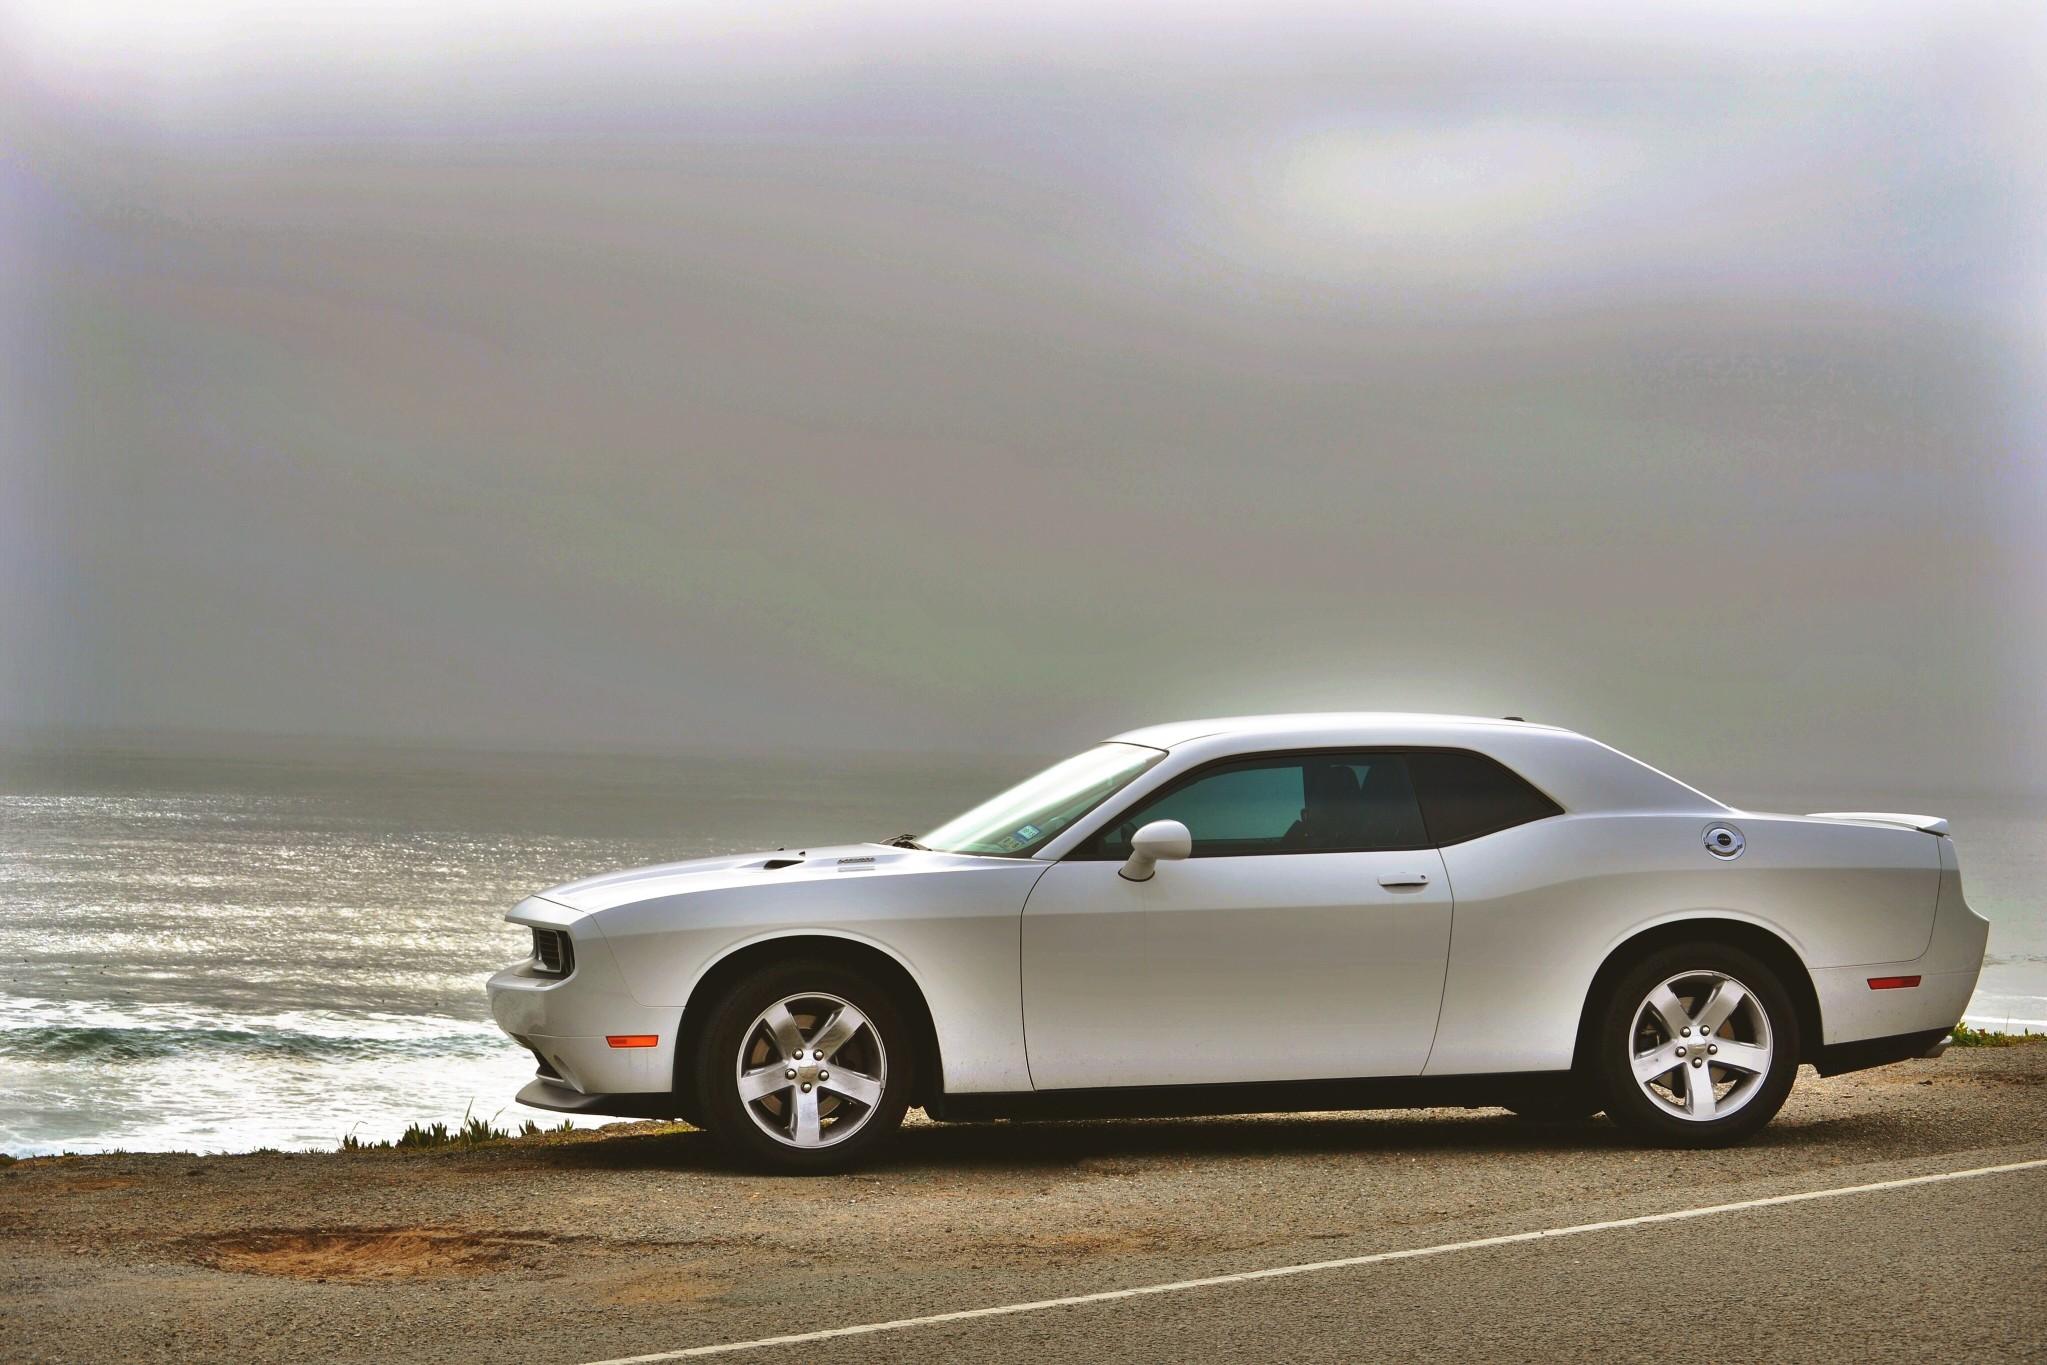 In 2020, to honor its 50th anniversary, Dodge released a special limited anniversary and commemorative editions of the Dodge Challenger.